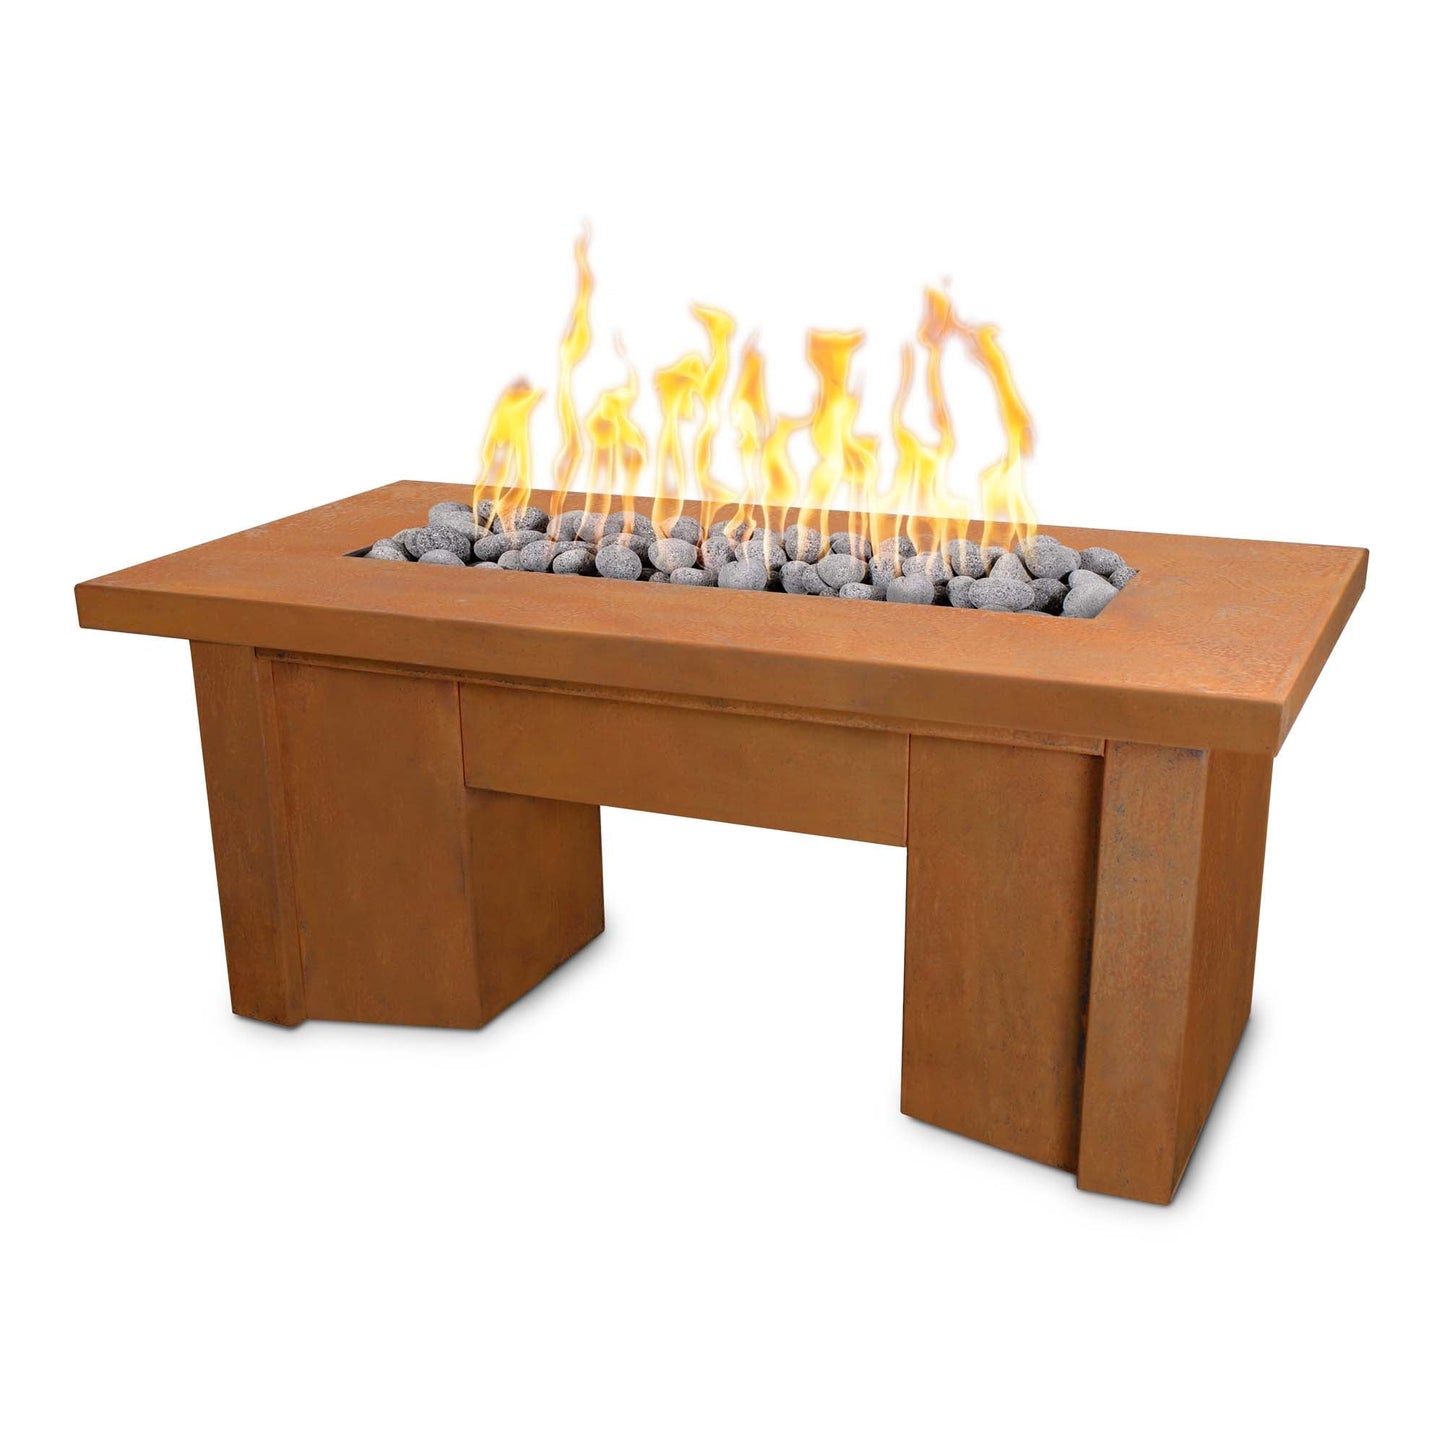 The Outdoor Plus Rectangular Alameda 60" Corten Steel Liquid Propane Fire Pit with 110V Electronic Ignition